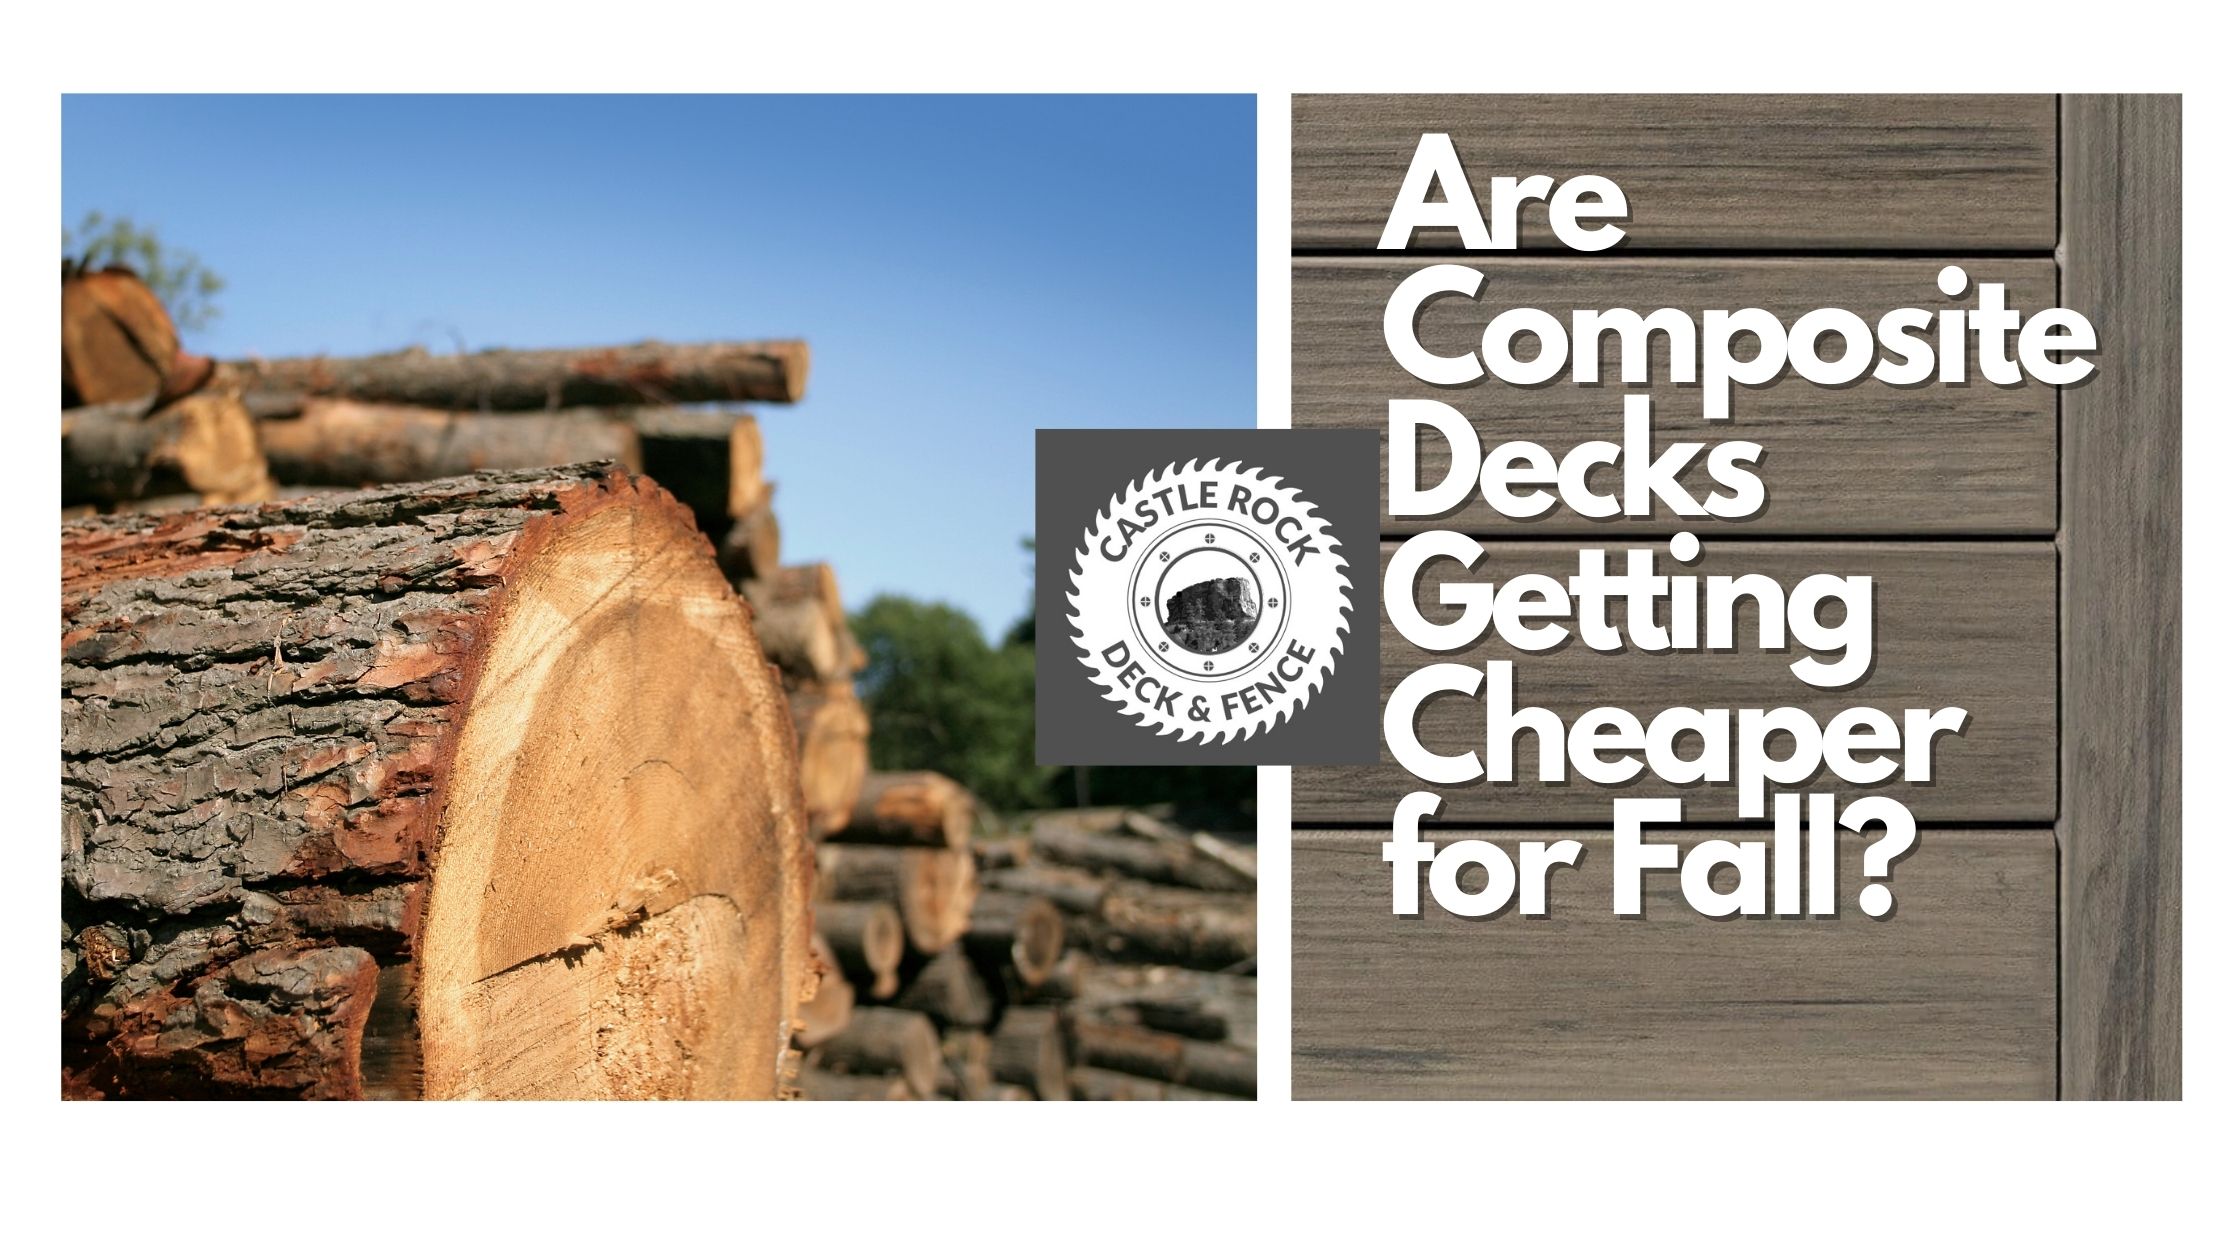 You are currently viewing ARE COMPOSITE DECKS GETTING CHEAPER FOR FALL?